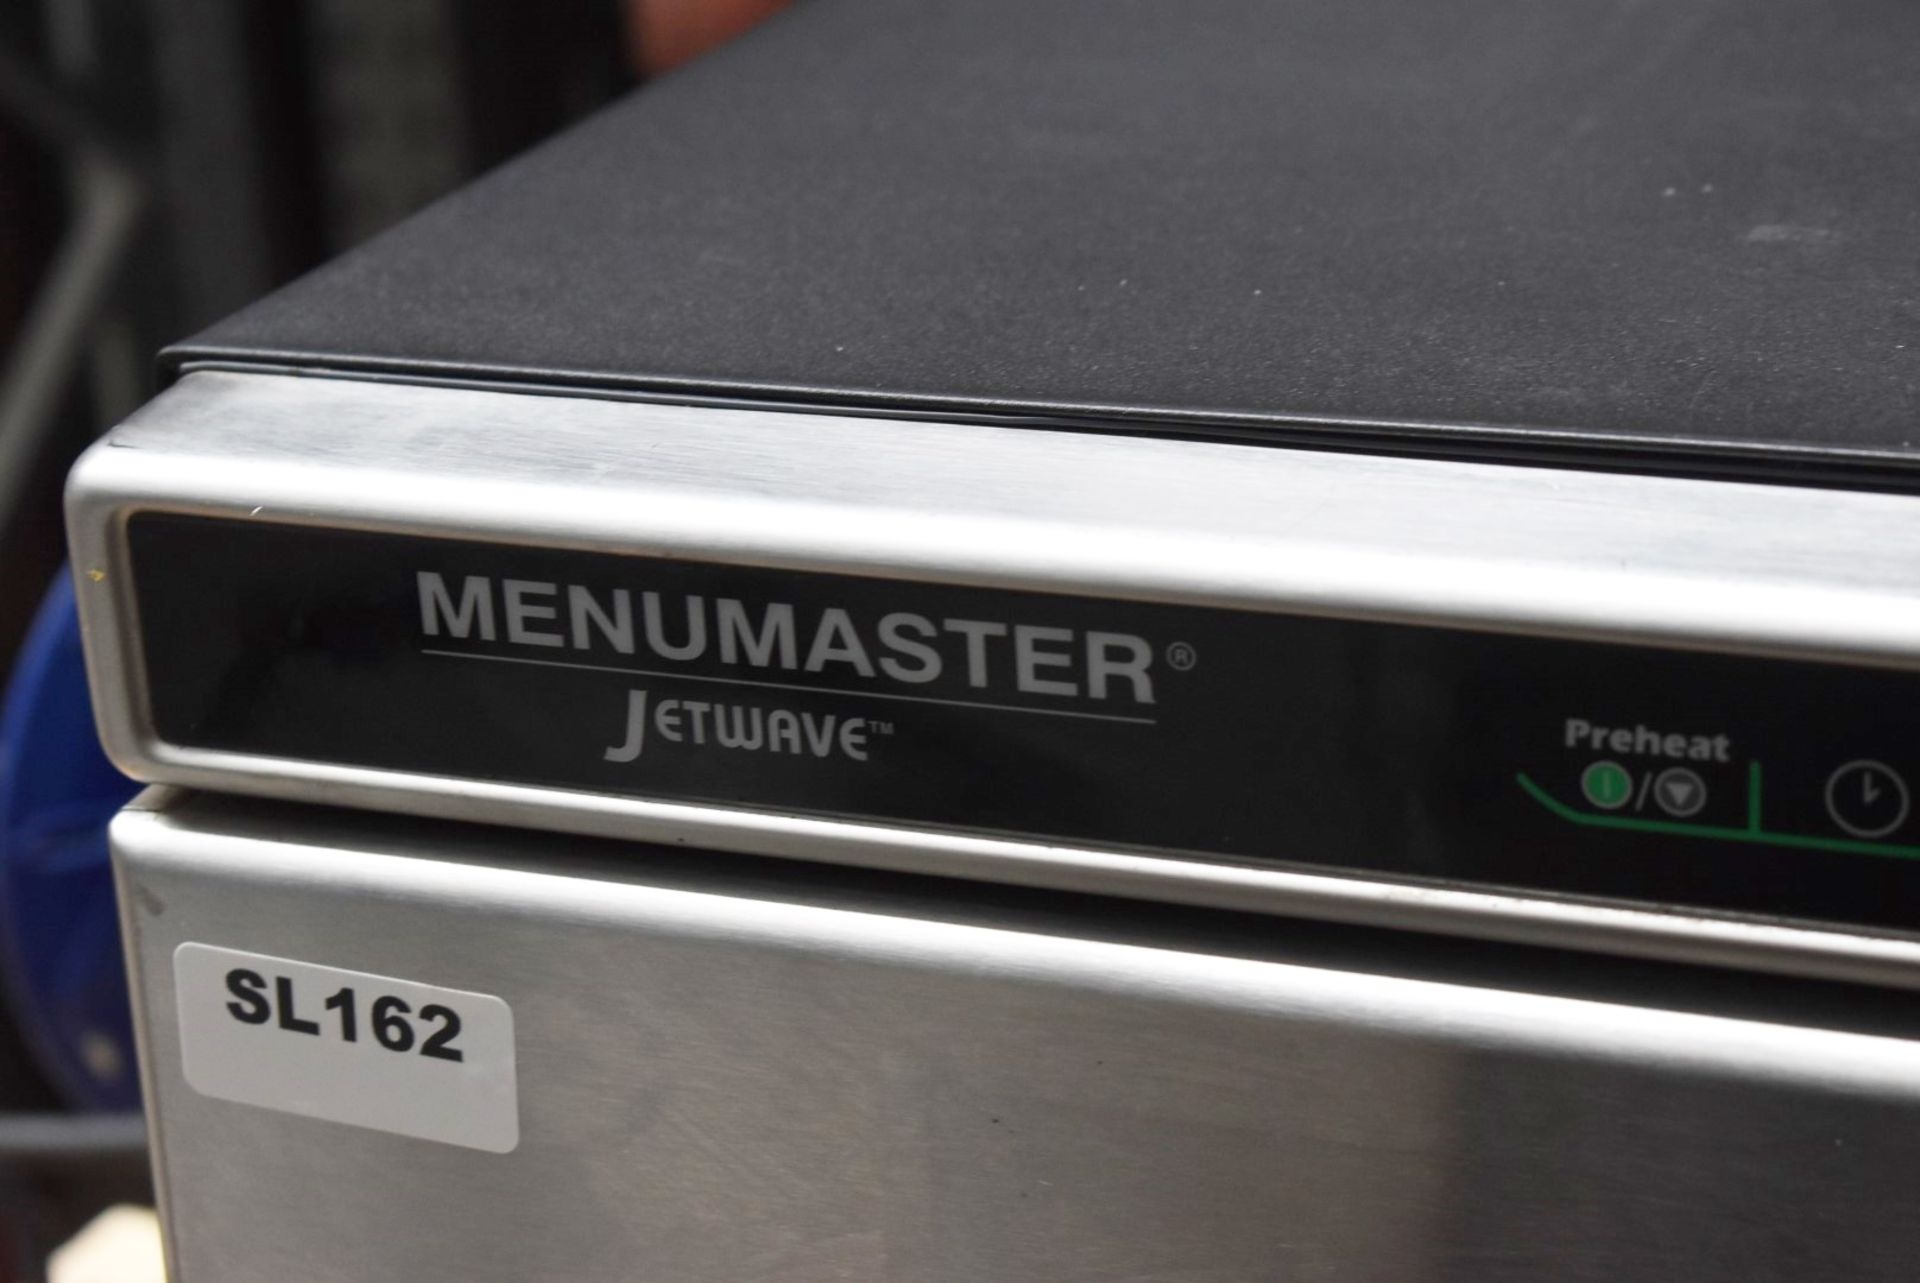 1 x Menumaster Jetwave JET514U High Speed Combination Microwave Oven - RRP £2,400 - Manufacture - Image 4 of 10